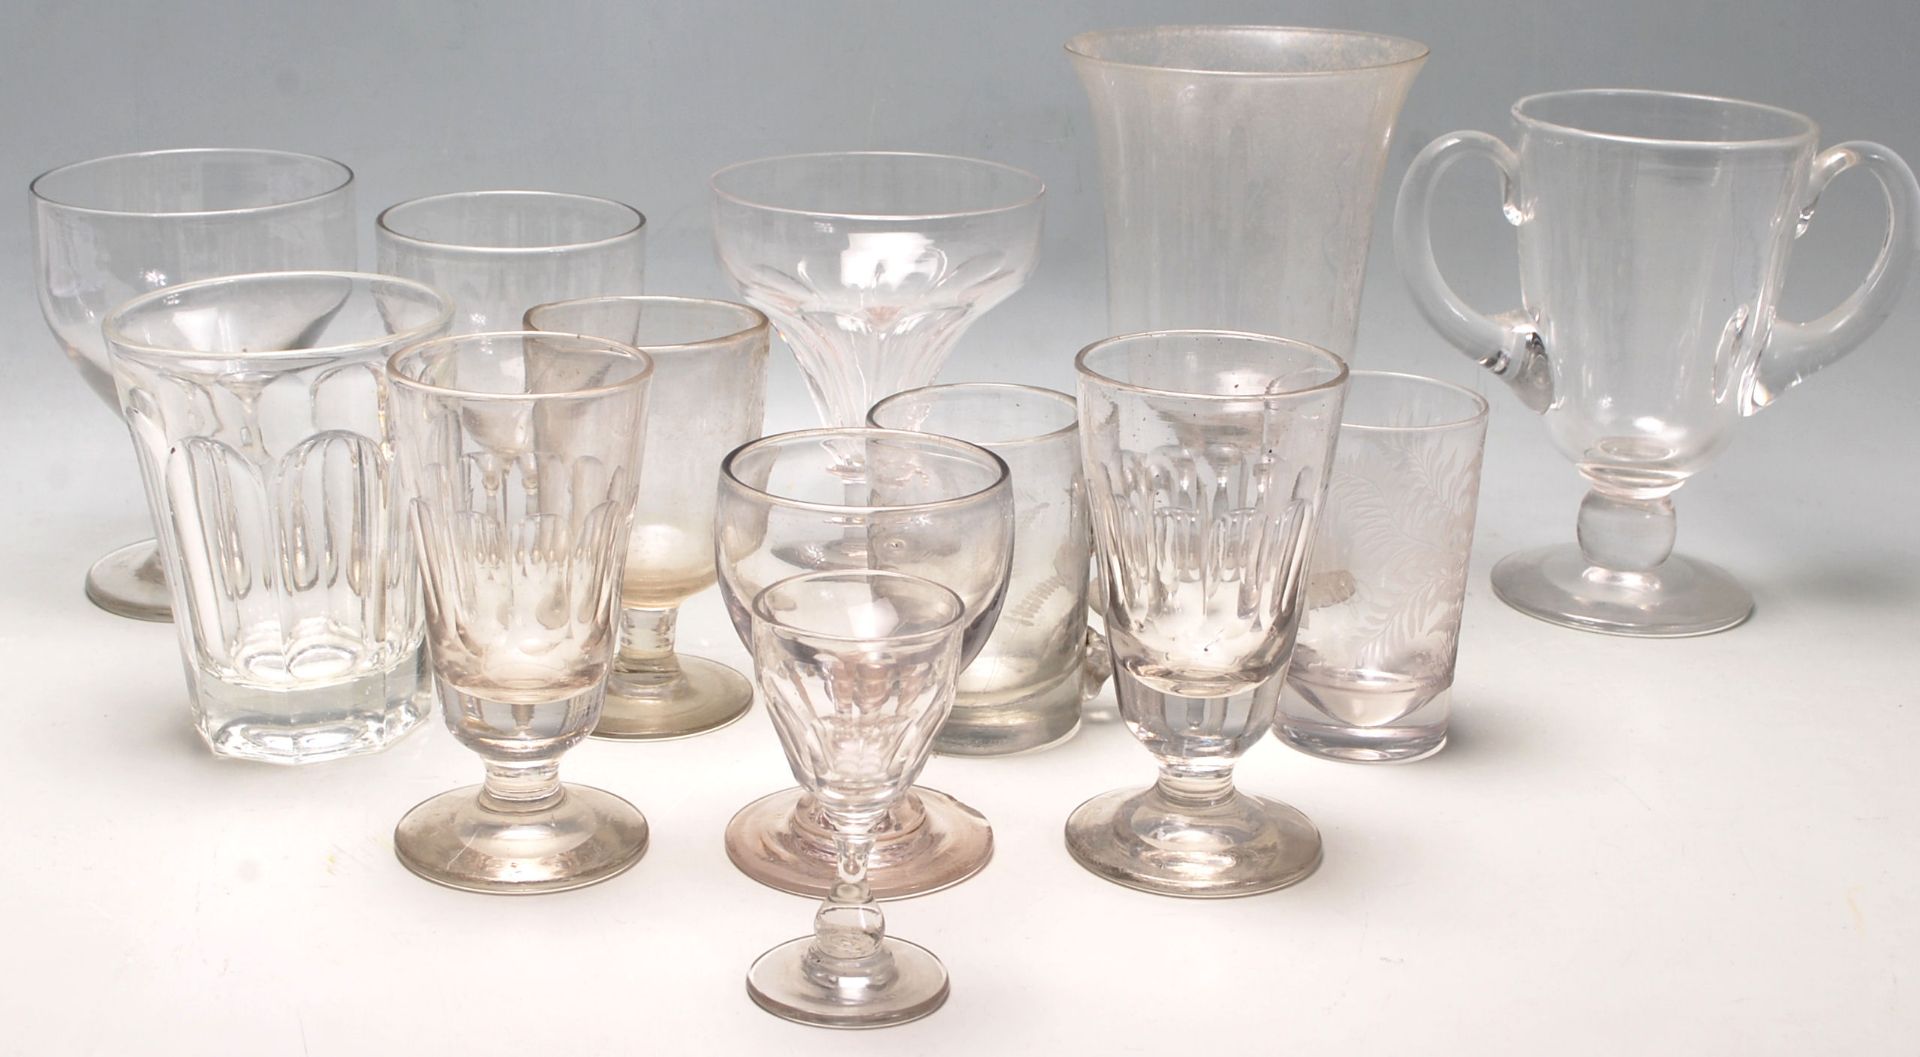 Aa collection of late 19th century and 20th century Victorian cut glass drinking glasses to